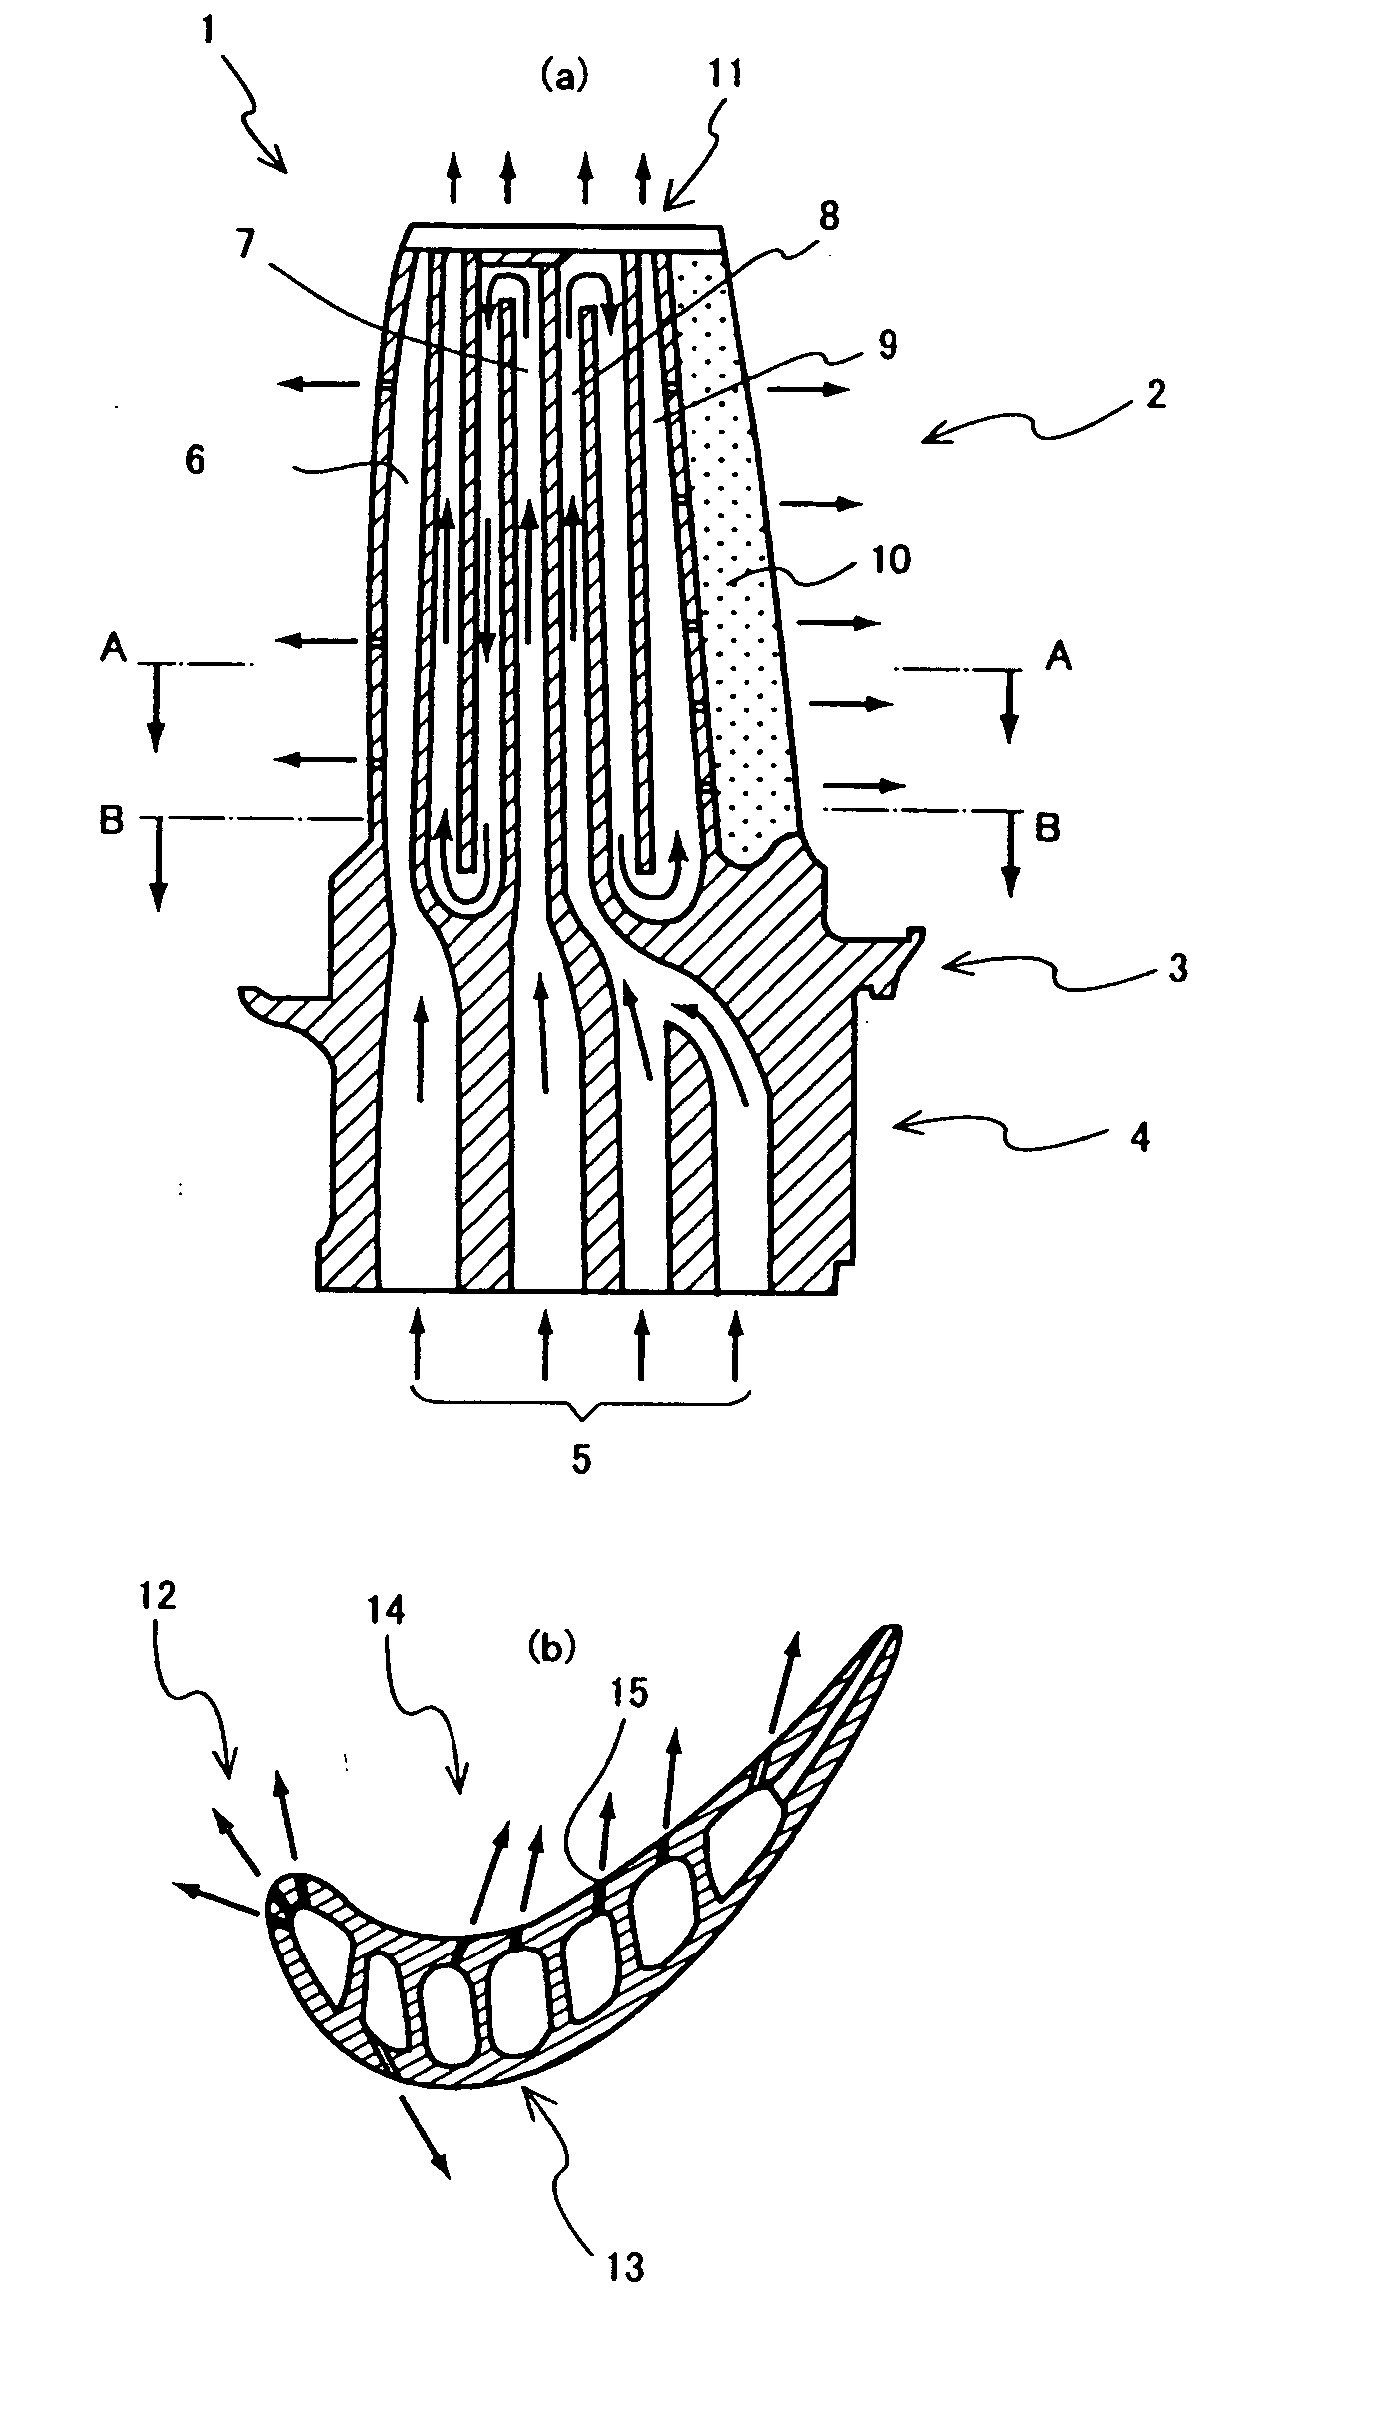 Gas turbine moving blade having a platform, a method of forming the moving blade, a sealing plate, and a gas turbine having these elements